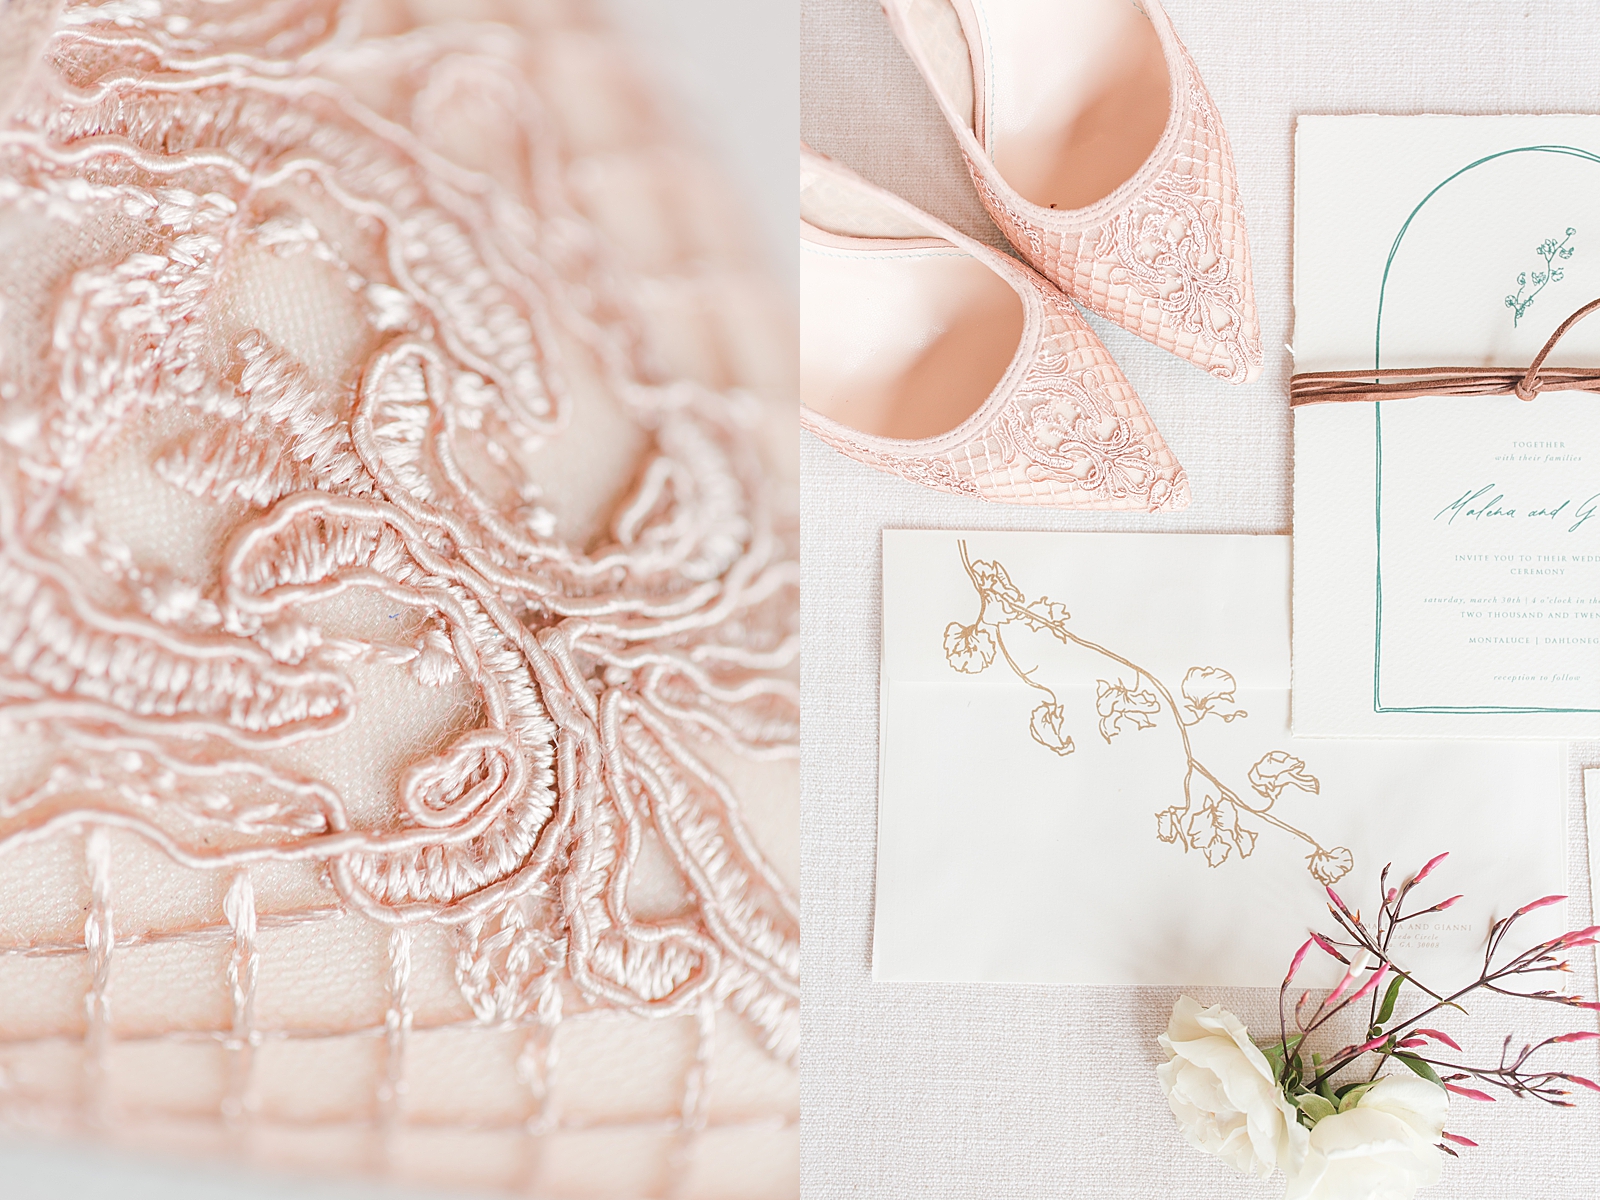 Montaluce Winery Wedding Detail of pink lace bridal shoe and Invitation Suite with shoes Photos